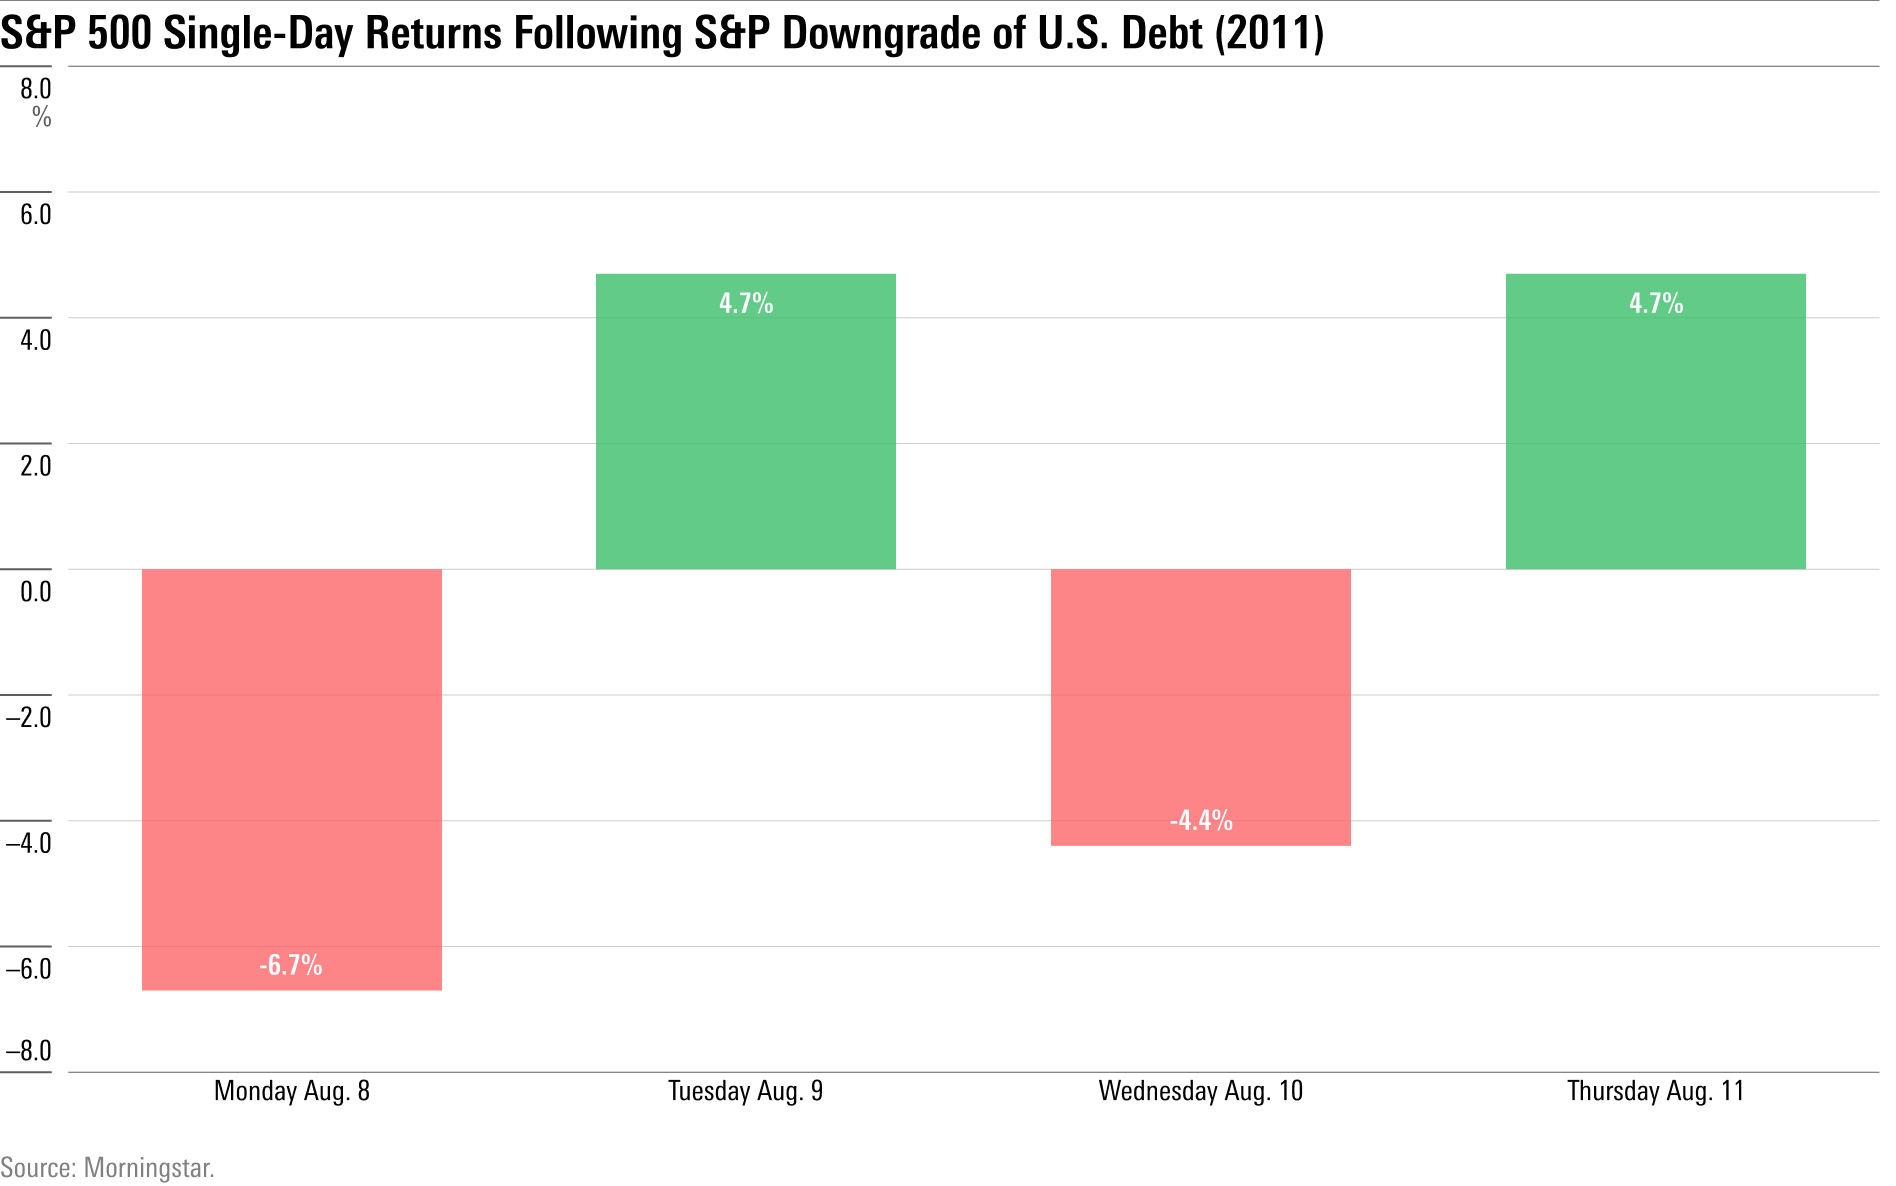 A bar chart of the S&P 500's single-day returns during the week after the U.S. credit rating was downgraded.